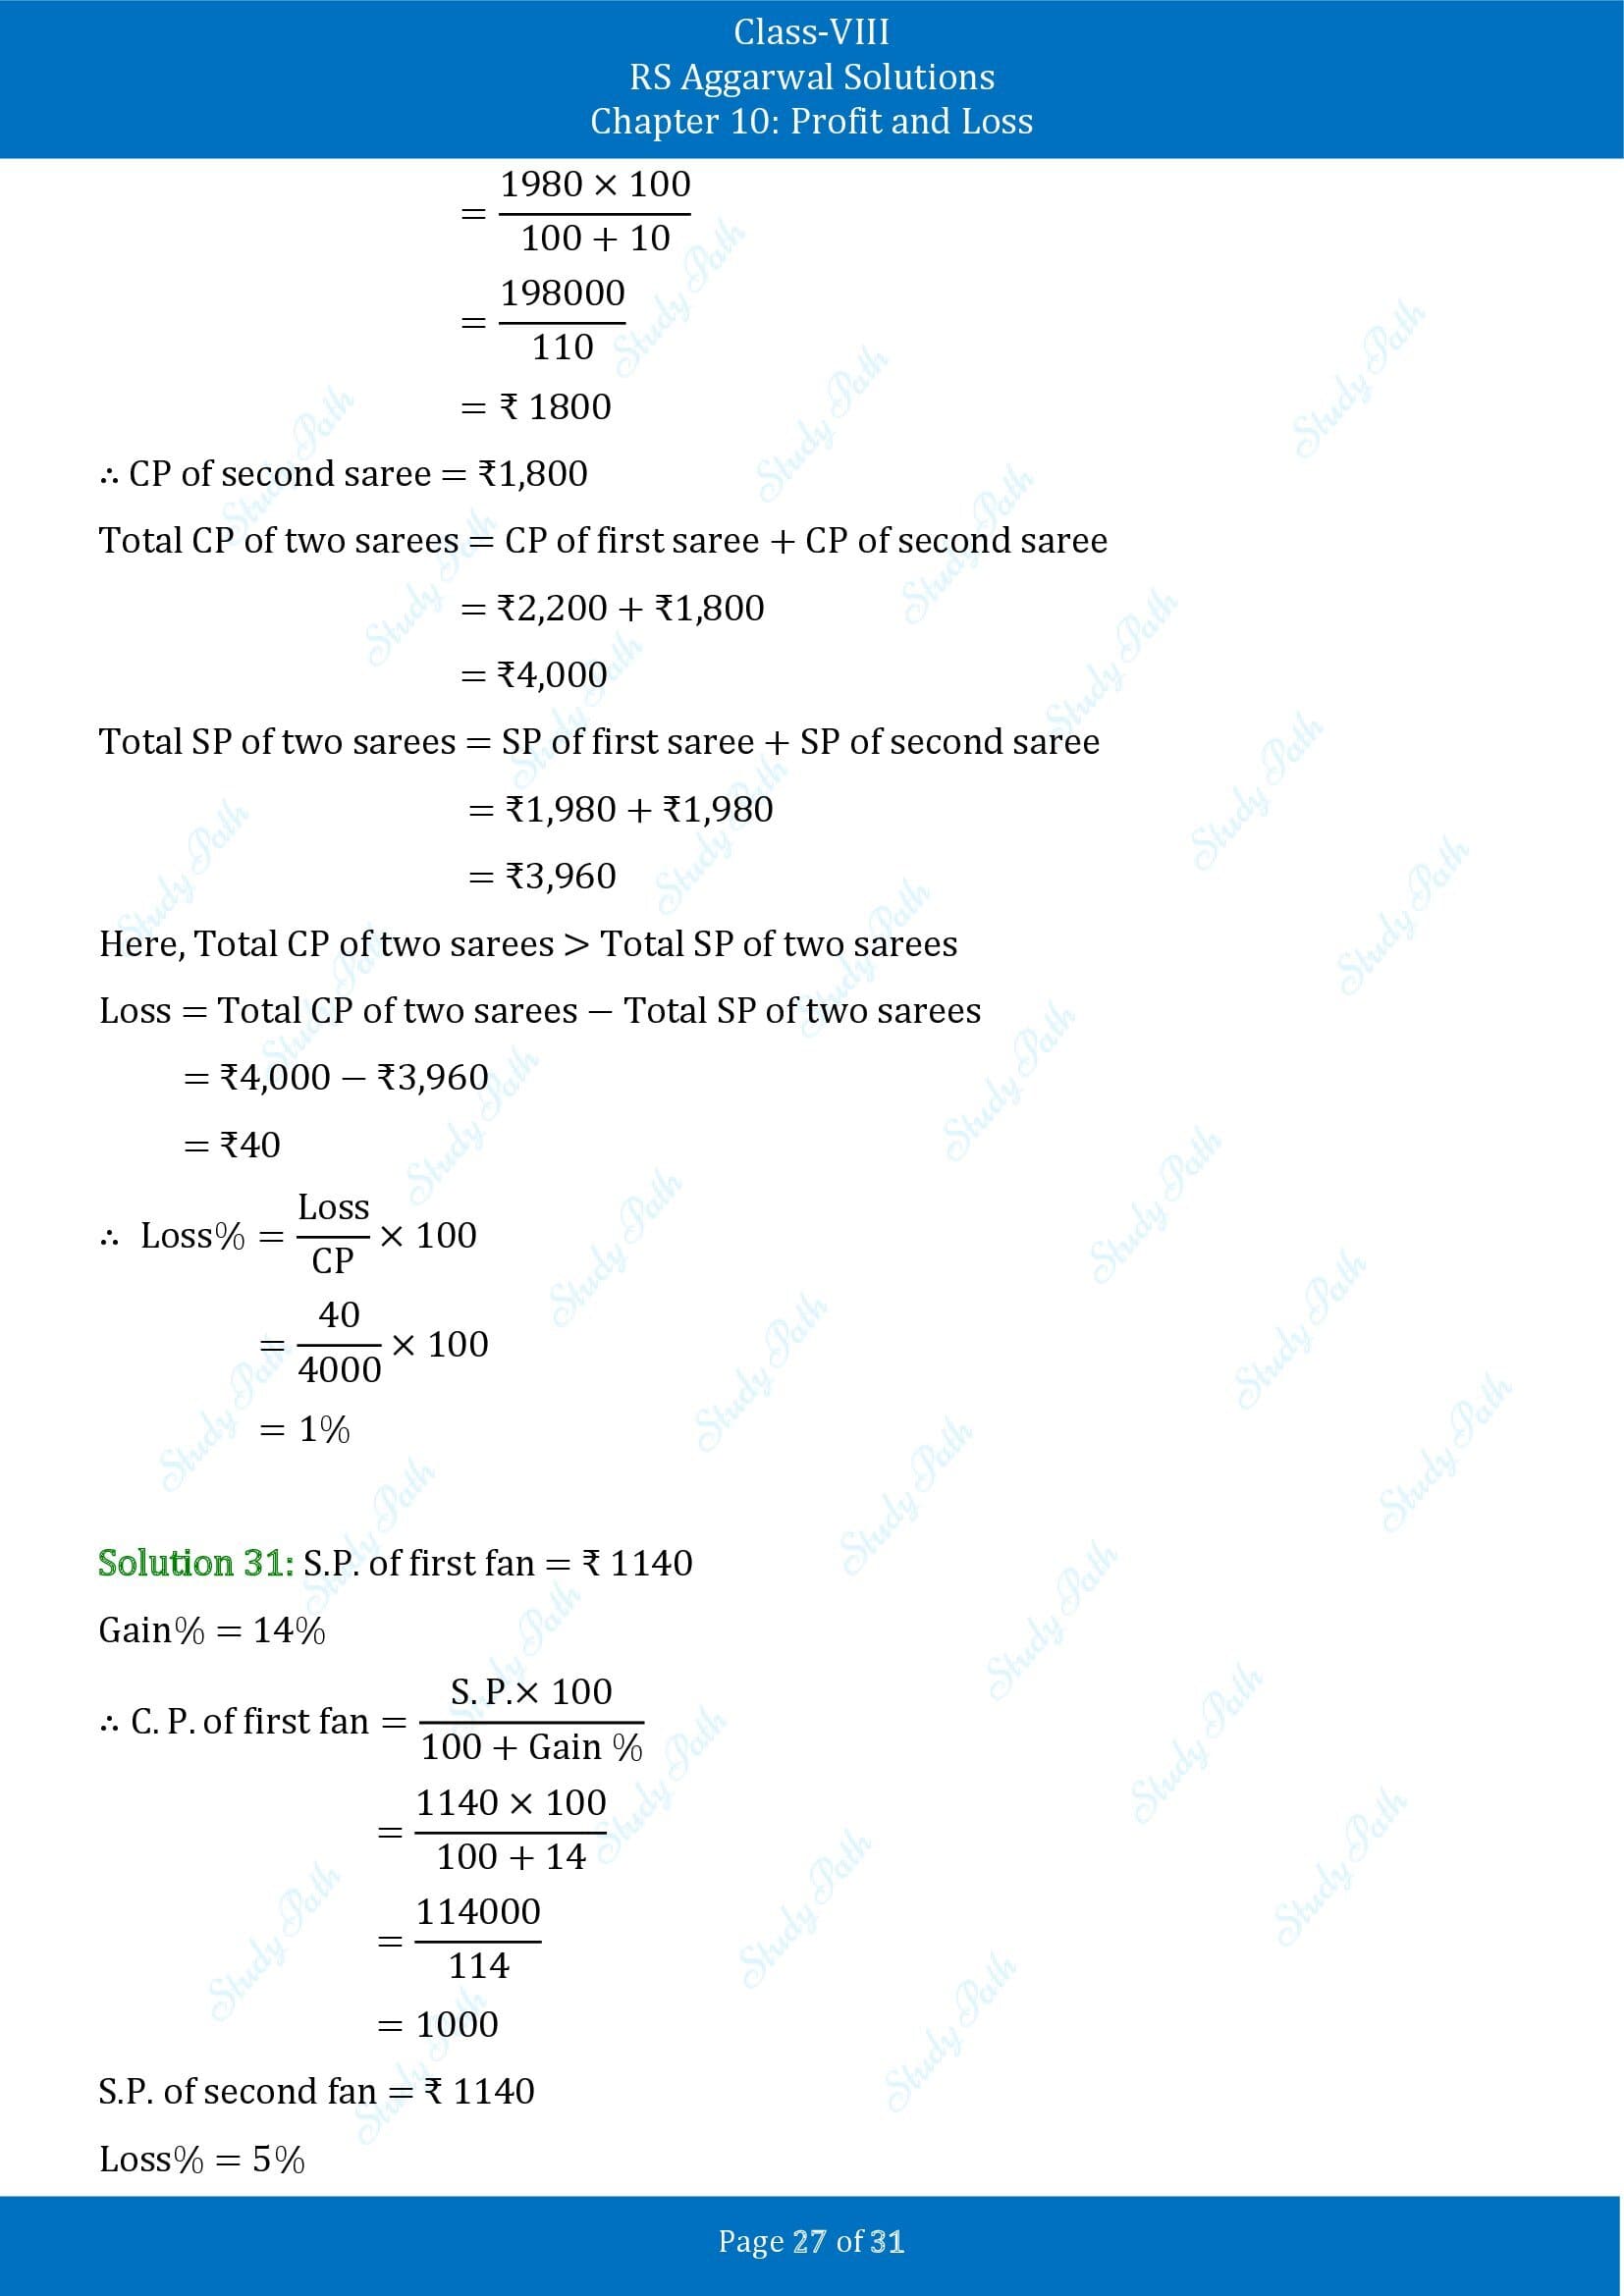 RS Aggarwal Solutions Class 8 Chapter 10 Profit and Loss Exercise 10A 00027